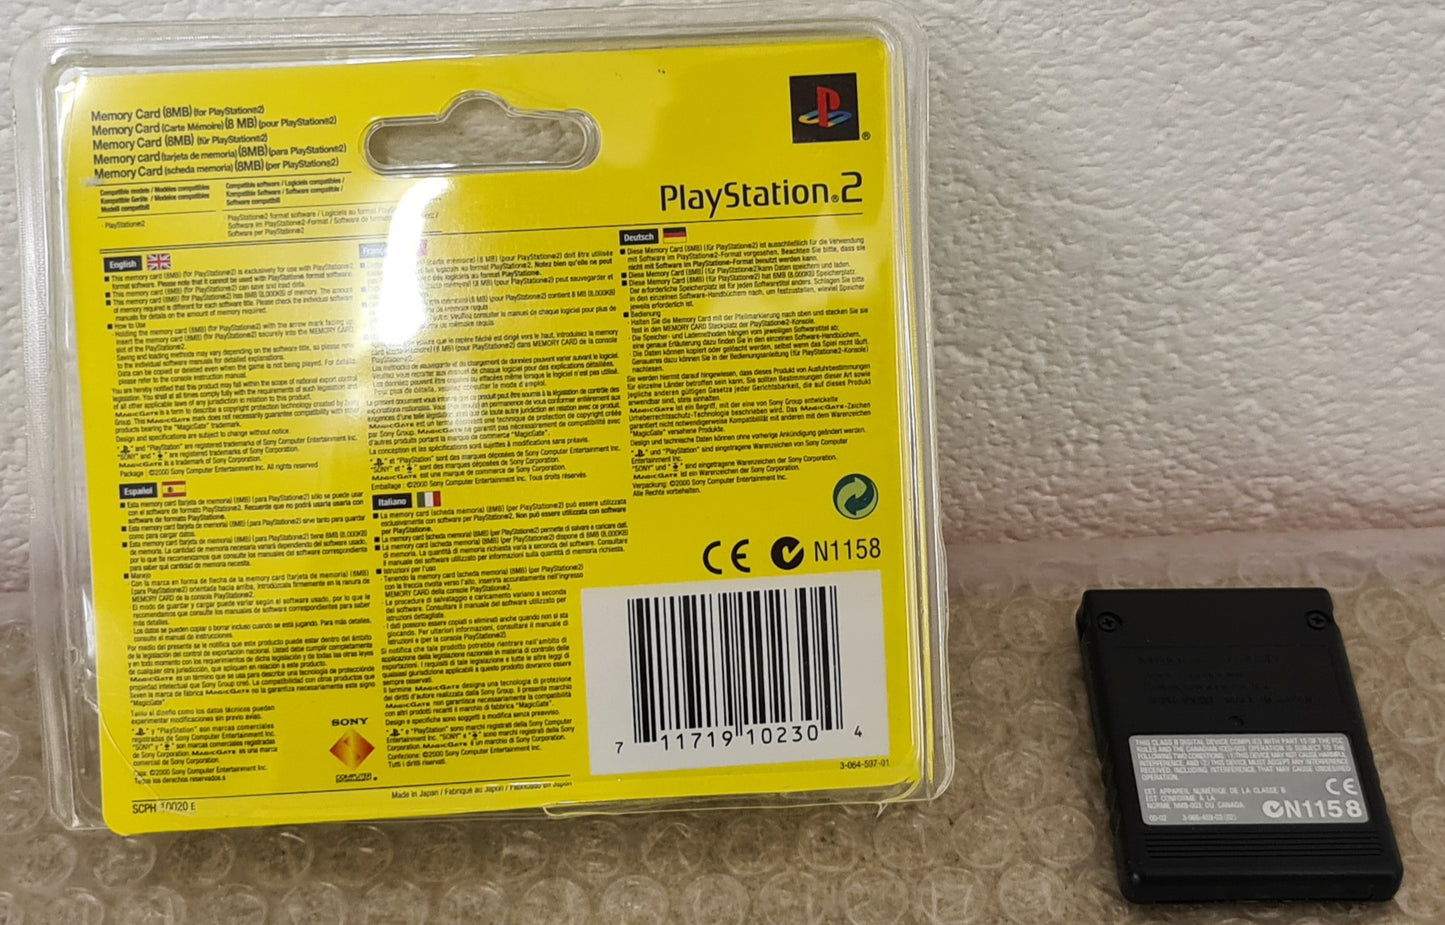 8MB Black Memory Card in a Blister Pack Sony Playstation 2 (PS2) Accessory)